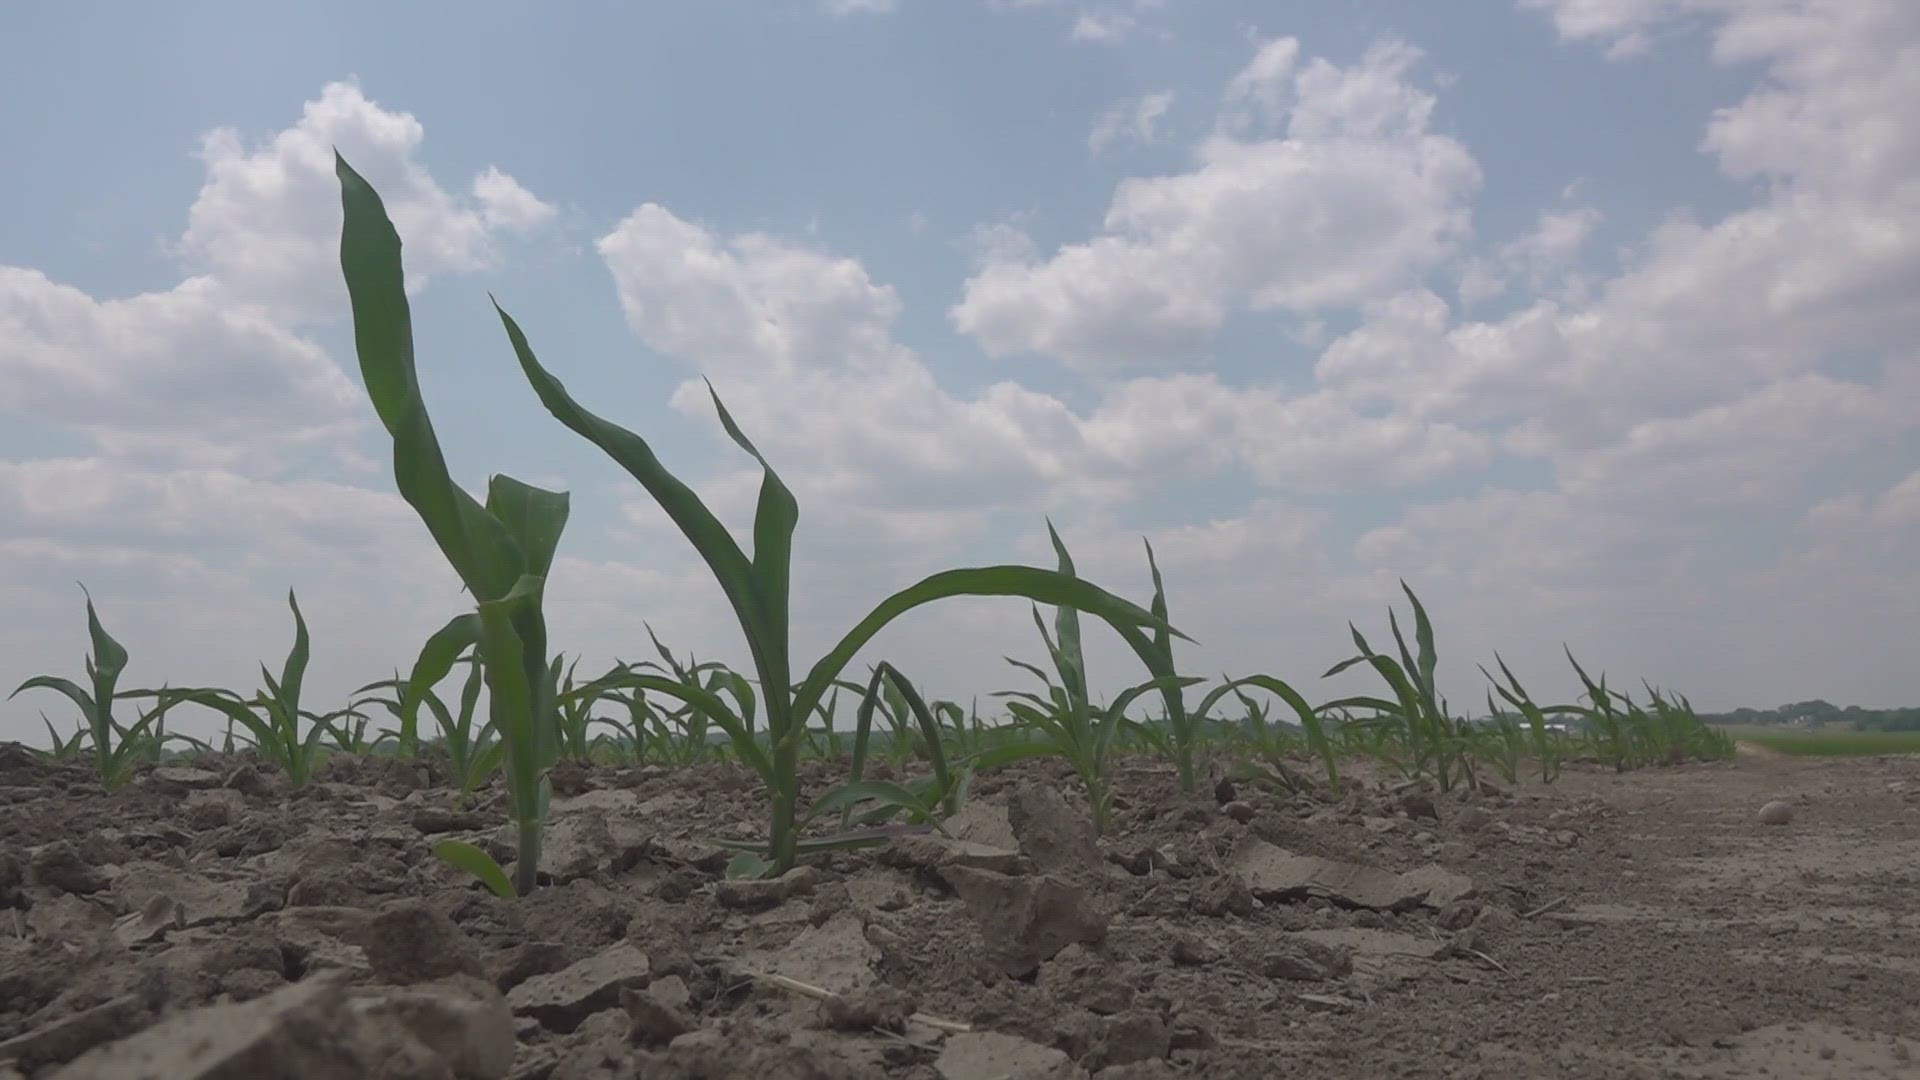 Farmers are closely watching the weekend forecast because their soybeans and corn need rain. Experts say it’s too early to tell if the drought will impact prices.